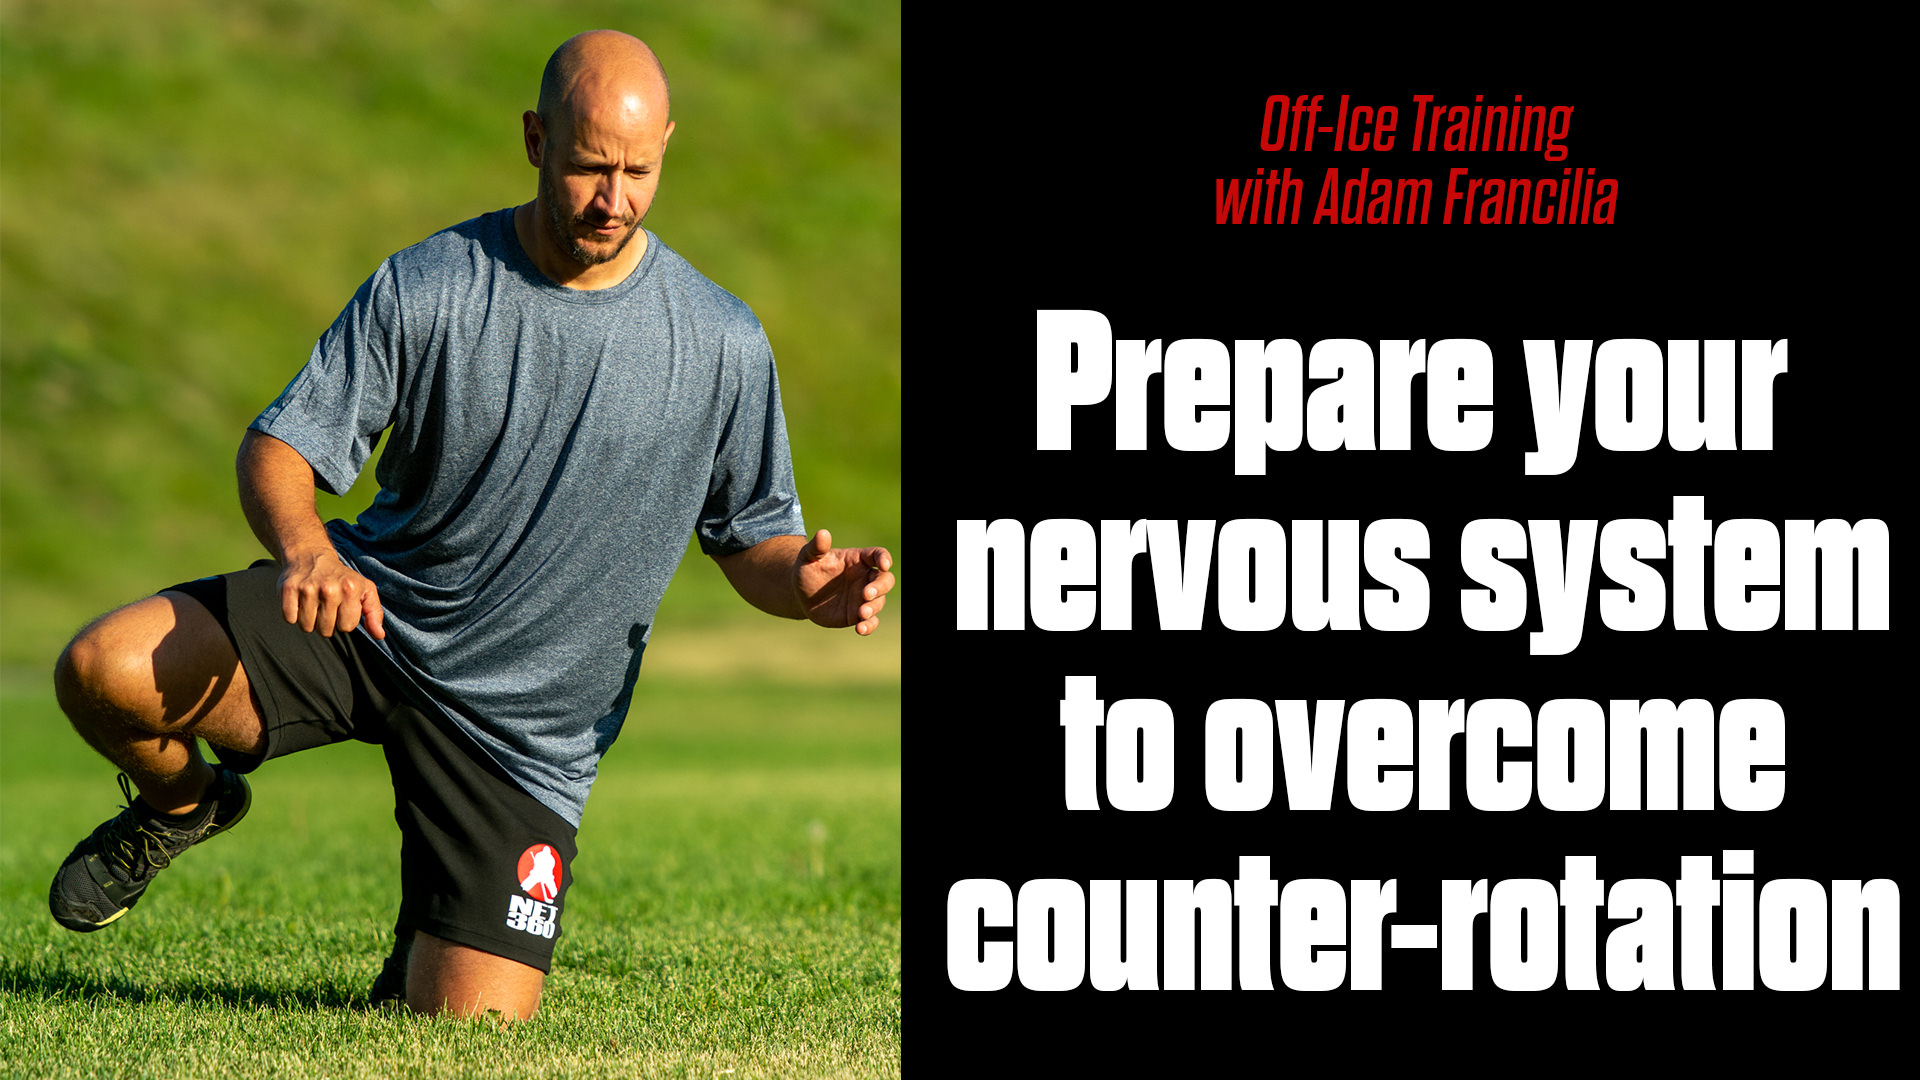 Off-Ice: Adam Francilia – Prepare your nervous system to overcome counter-rotation.